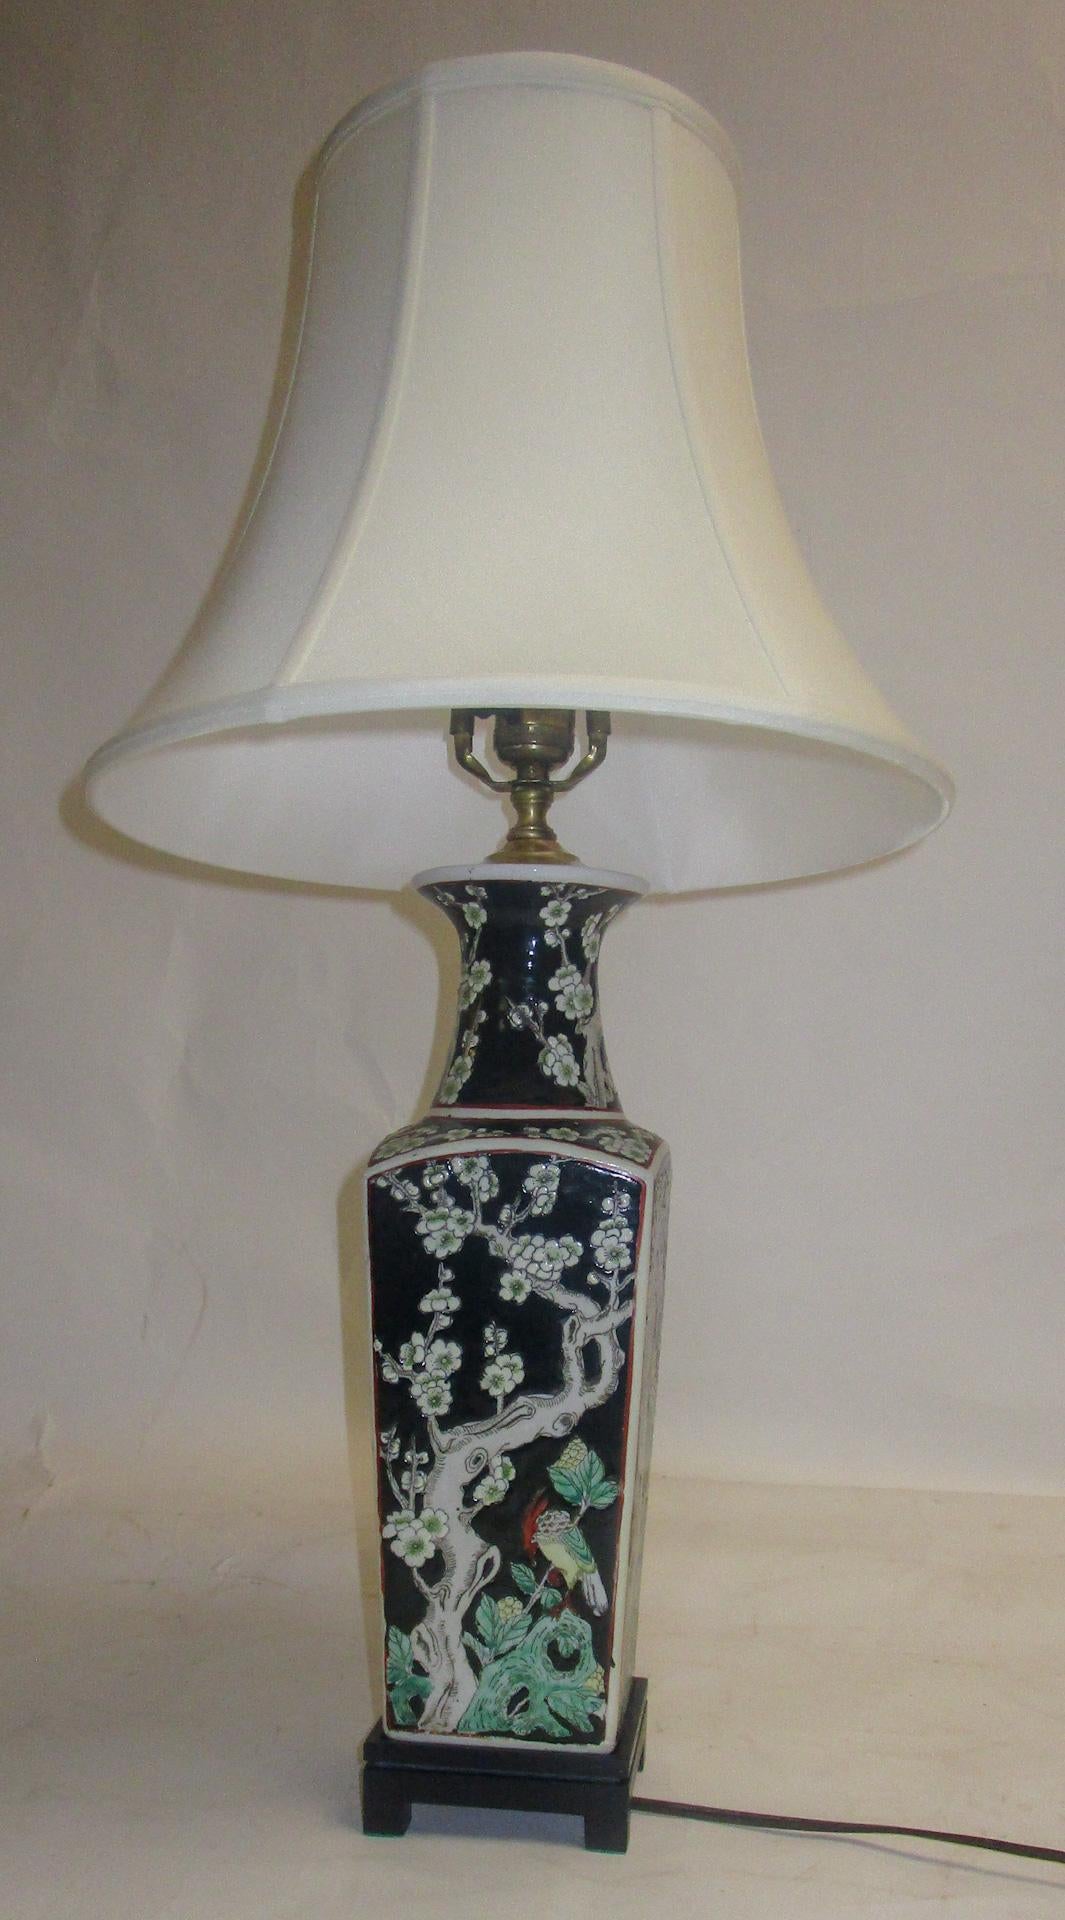 Chinese Export table lamp made from a graceful vase decorated with colorful birds, dogwood branches and fruit on an orange peel surface. The hardware is brass and the vase is perched on a stylish wooden base. The unusual greens and crimson colors